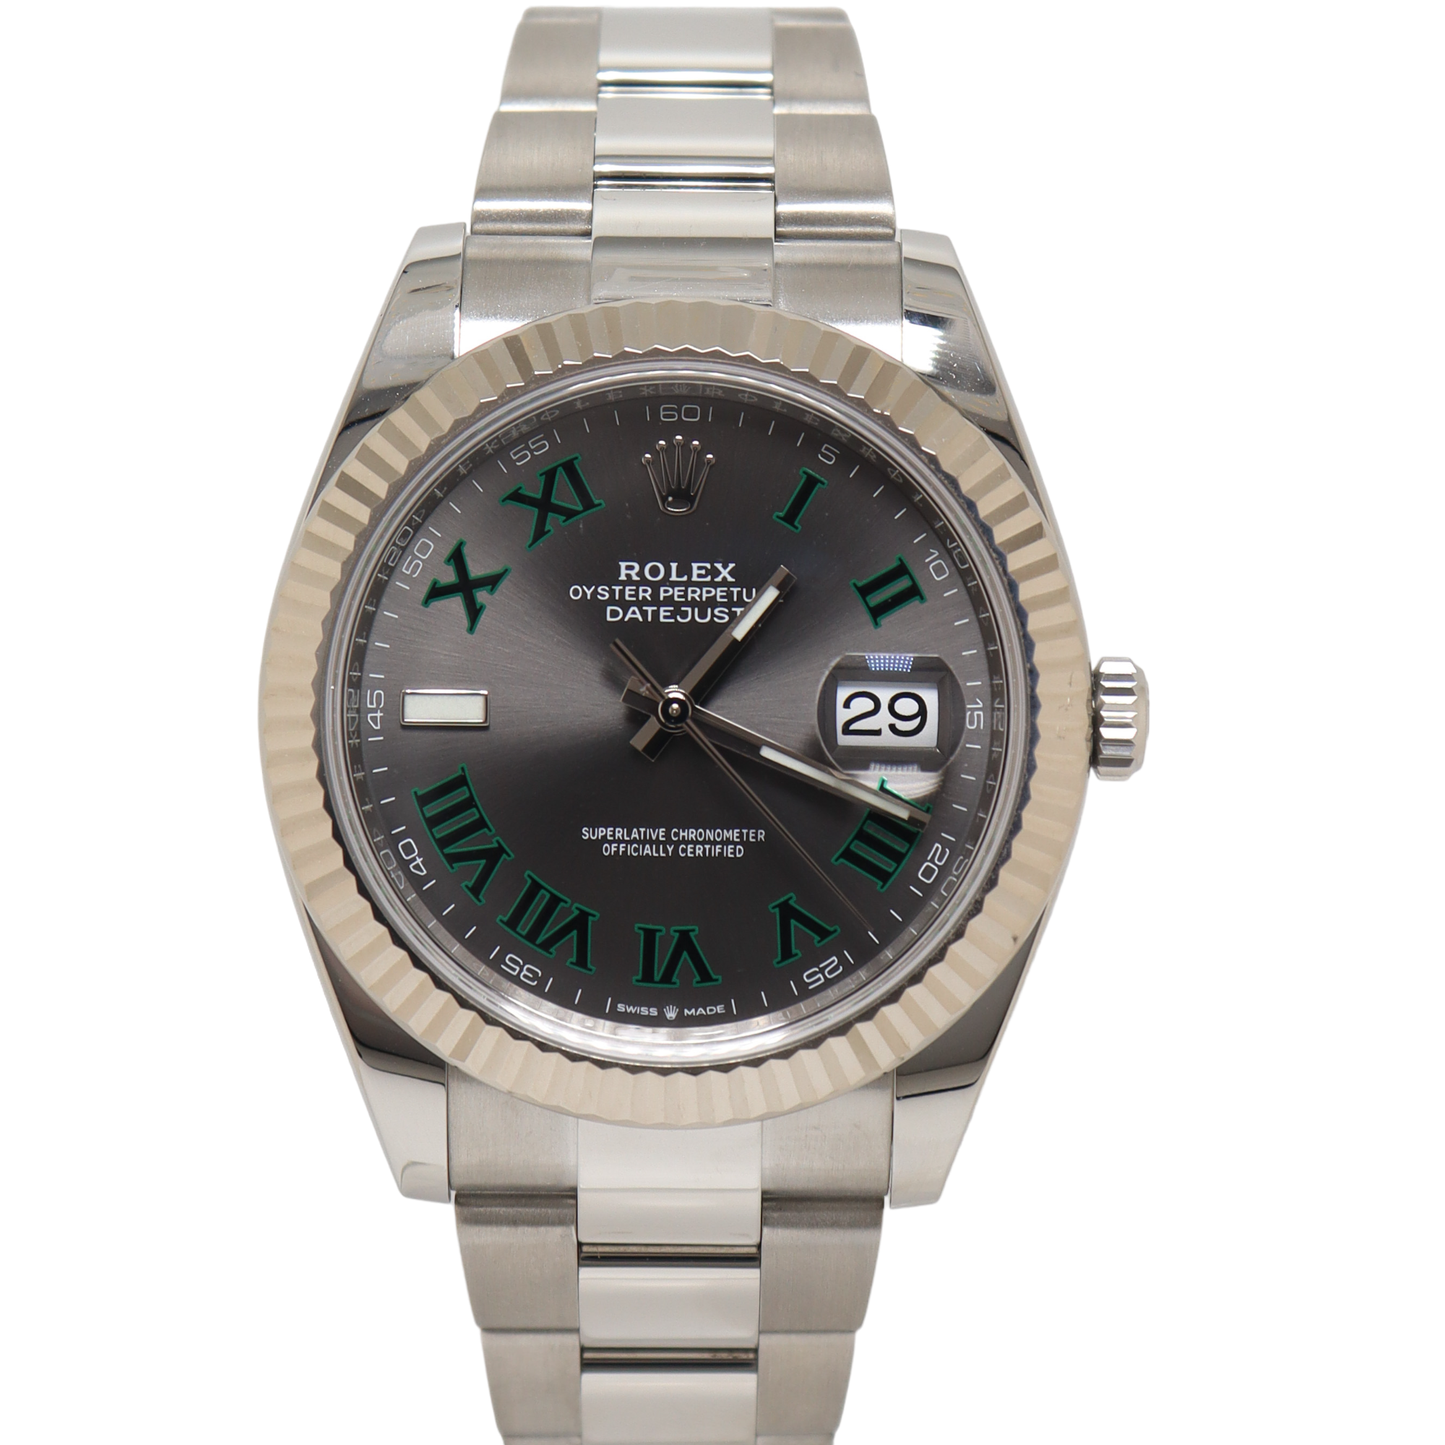 Rolex Datejust 41mm Stainless Steel Wimbledon Dial Watch Reference# 126334